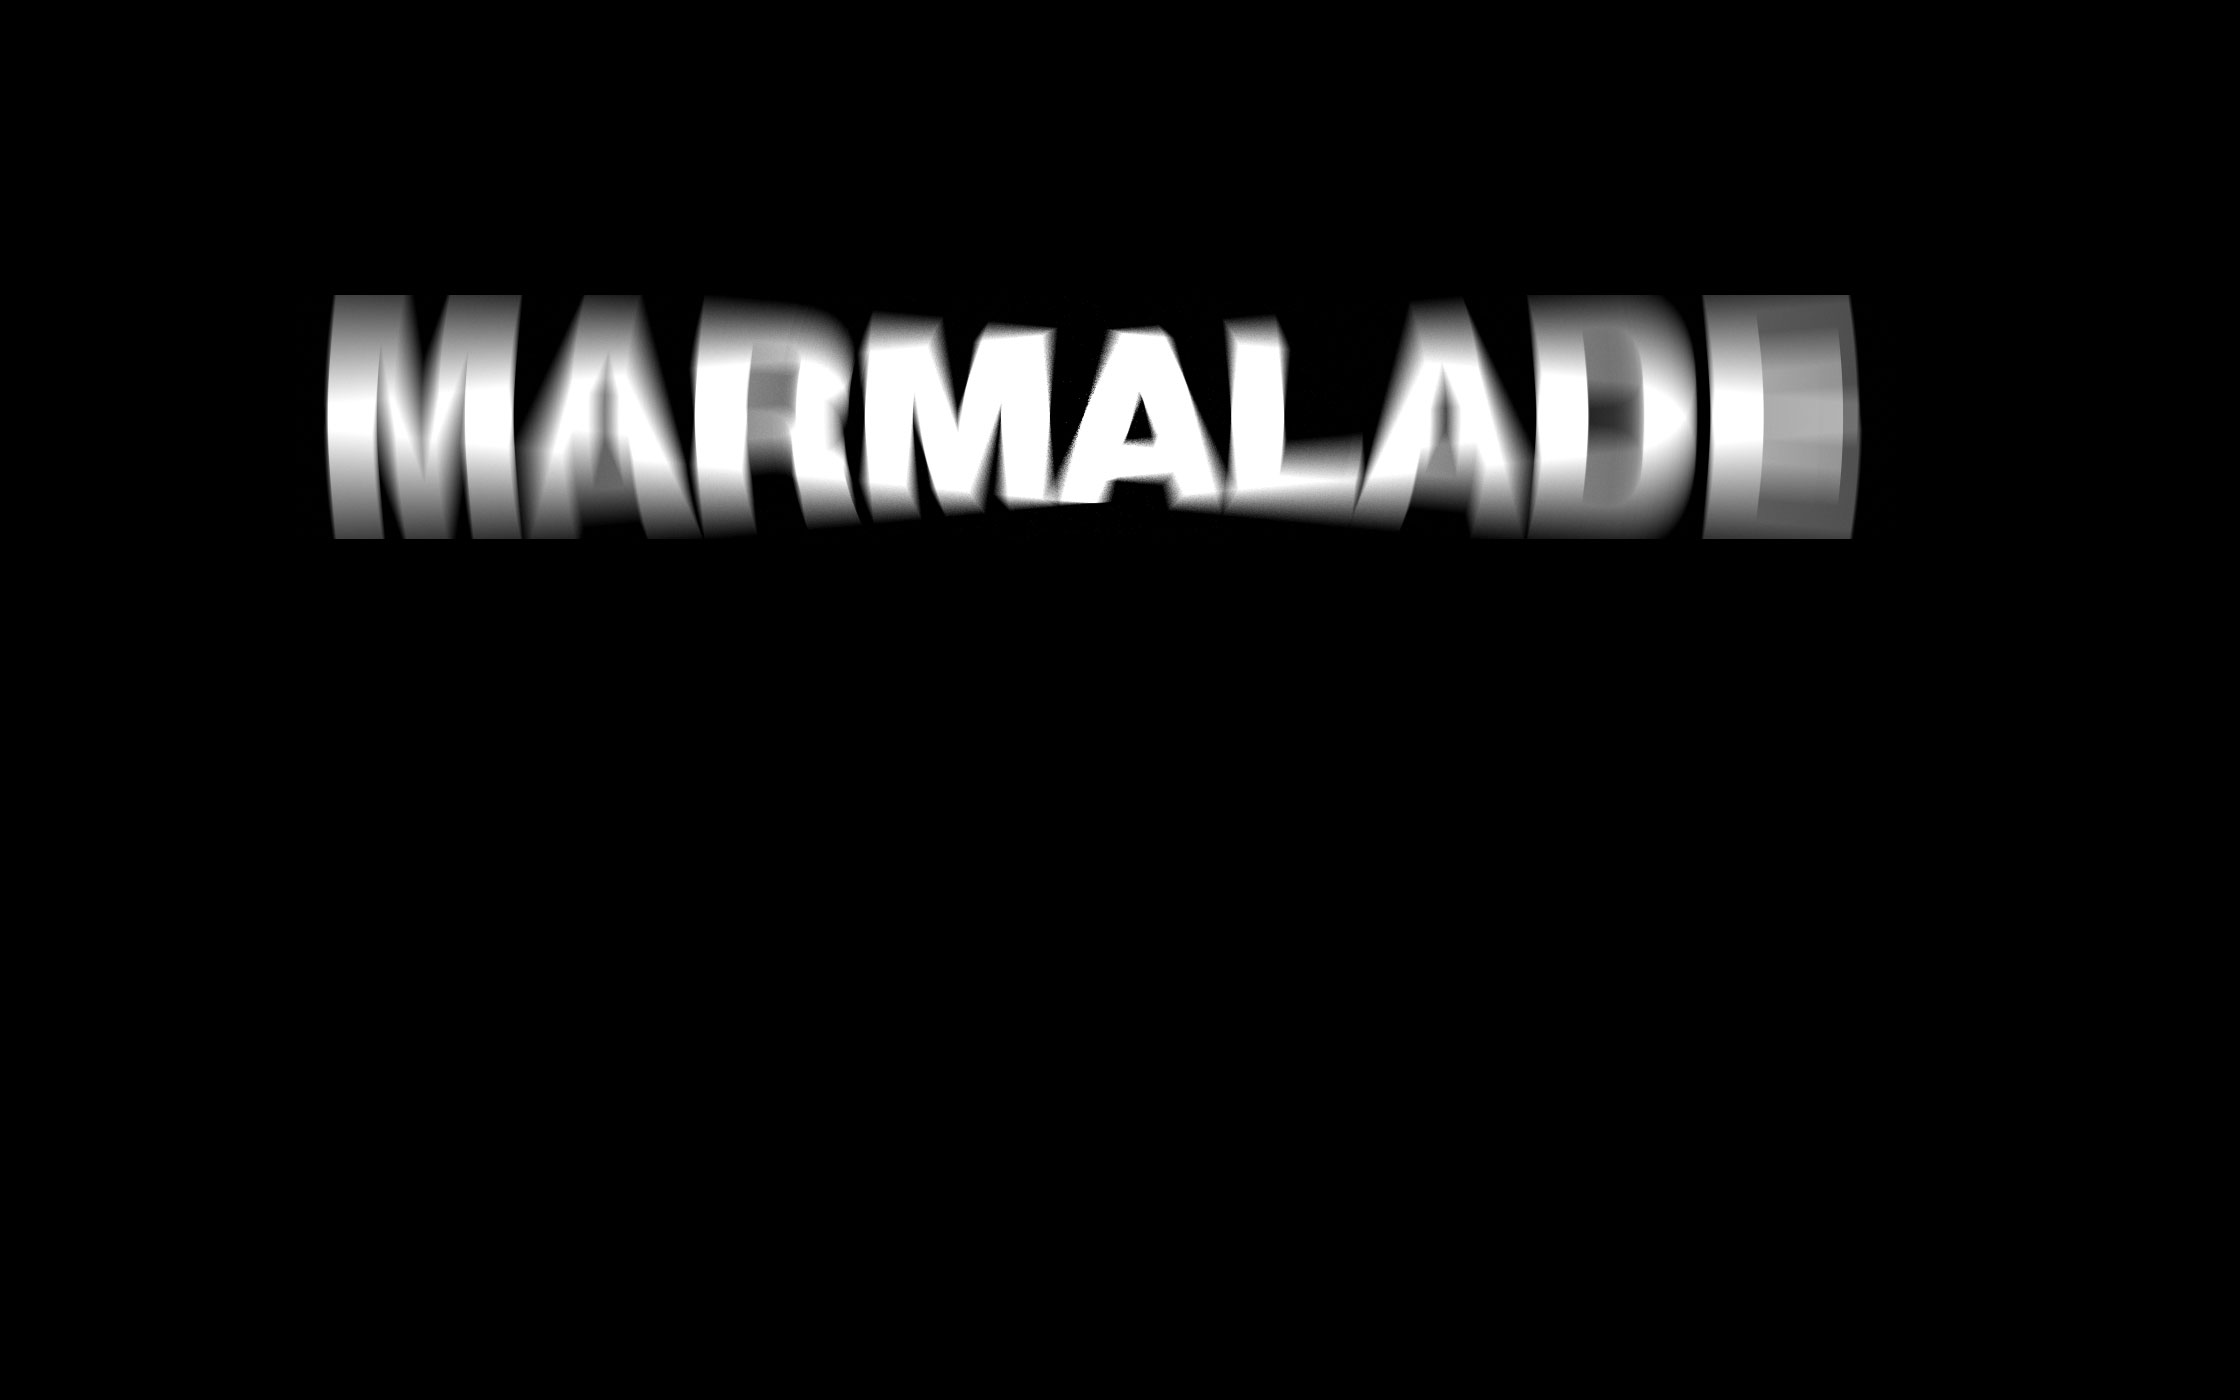 We Get Chosen By The BBC To Rebrand Marmalade!